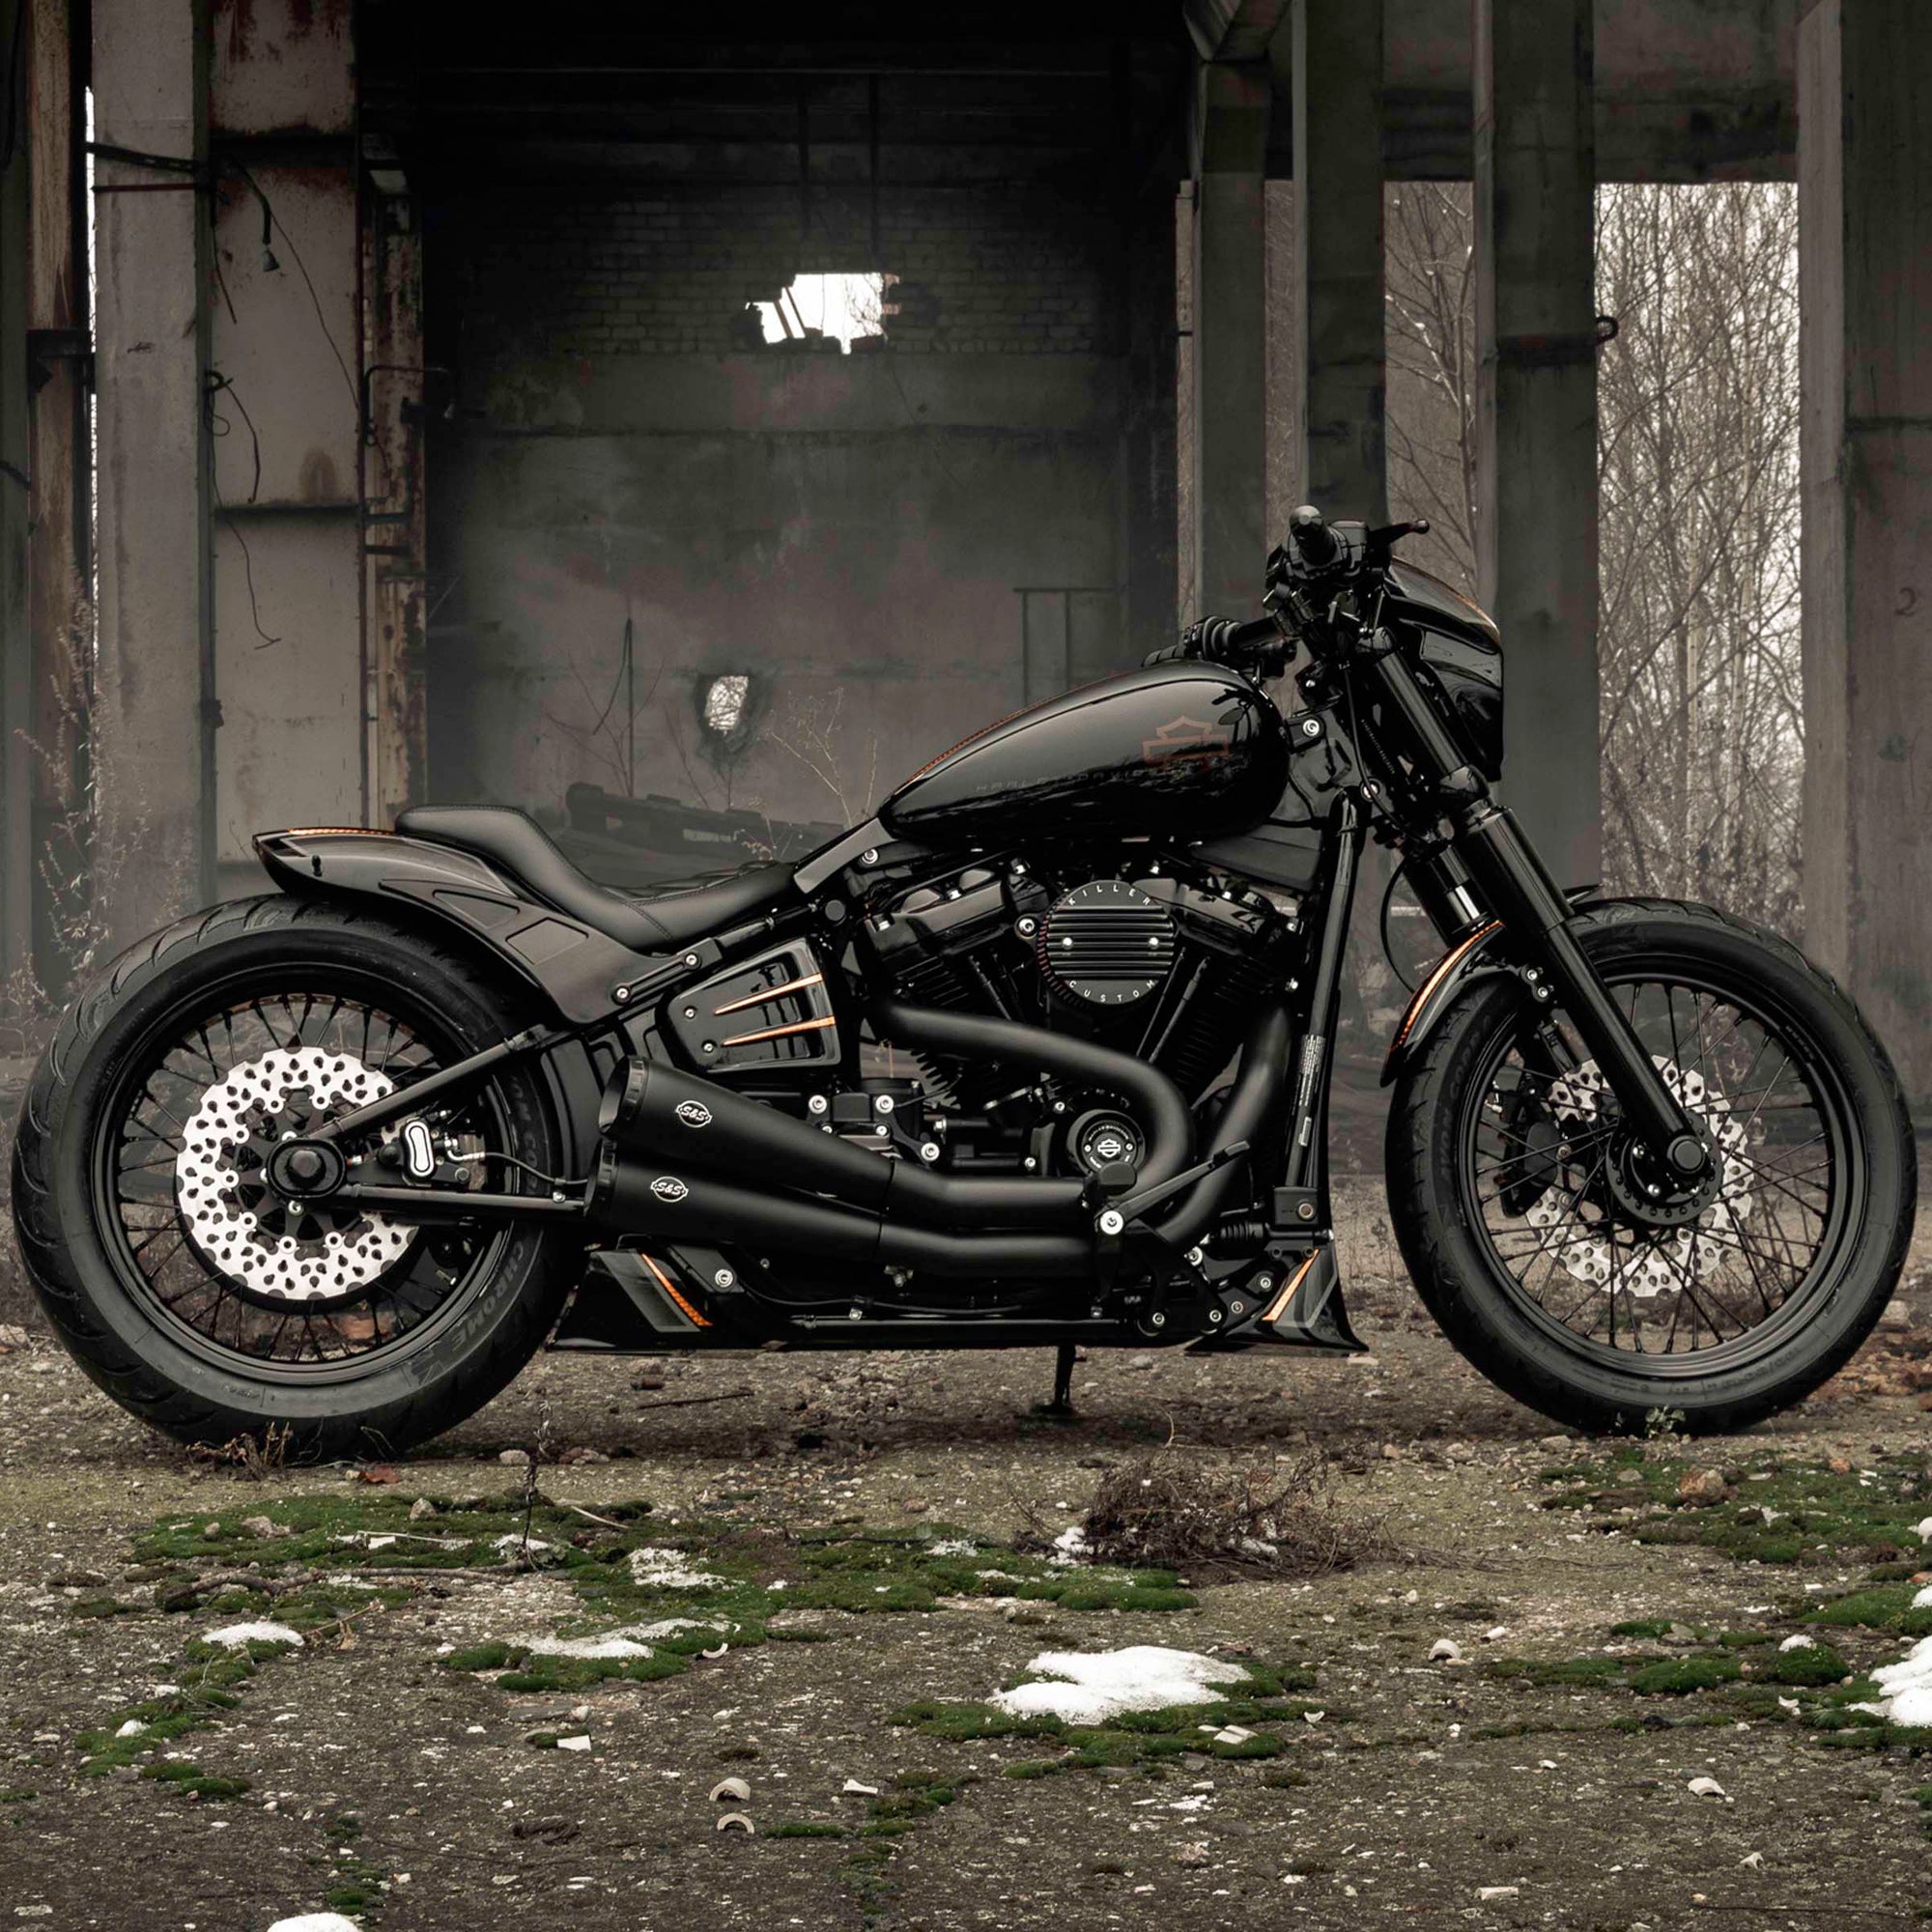 Harley Davidson motorcycle with Killer Custom parts from the side outside in an abandoned environment